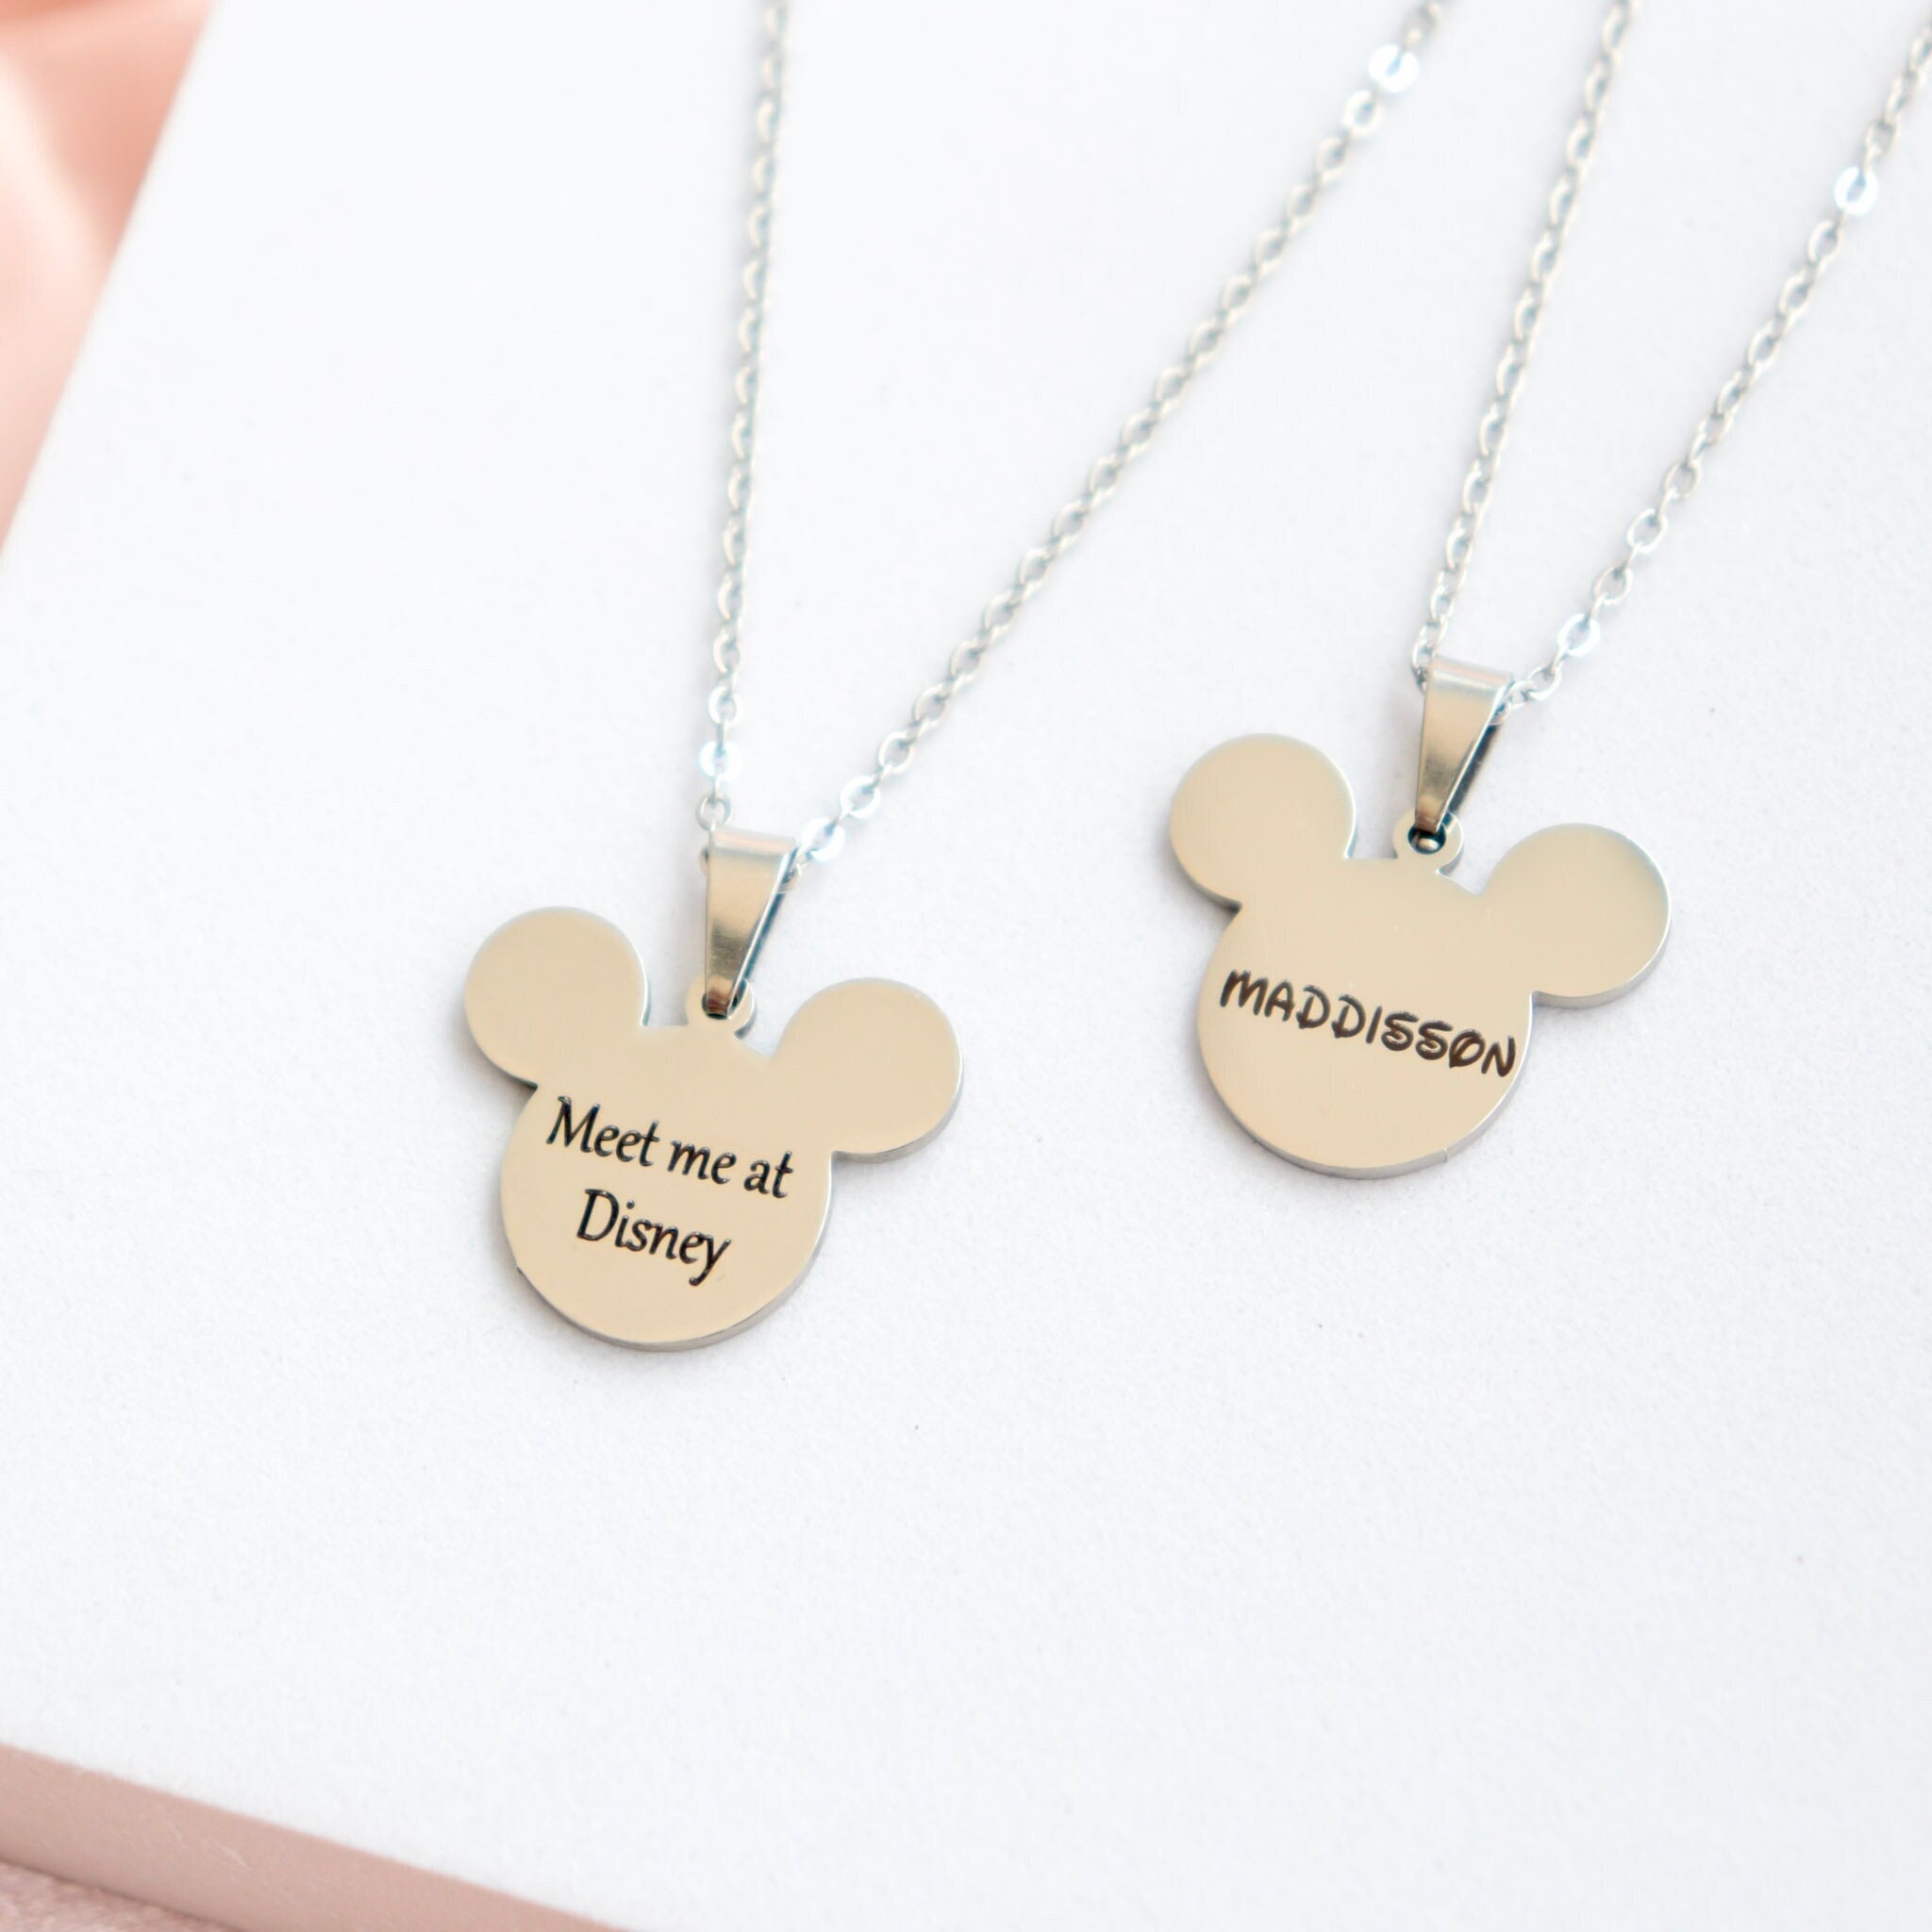 Necklaces for Girls: Disney, Anime & Crystal Necklaces | Hot Topic